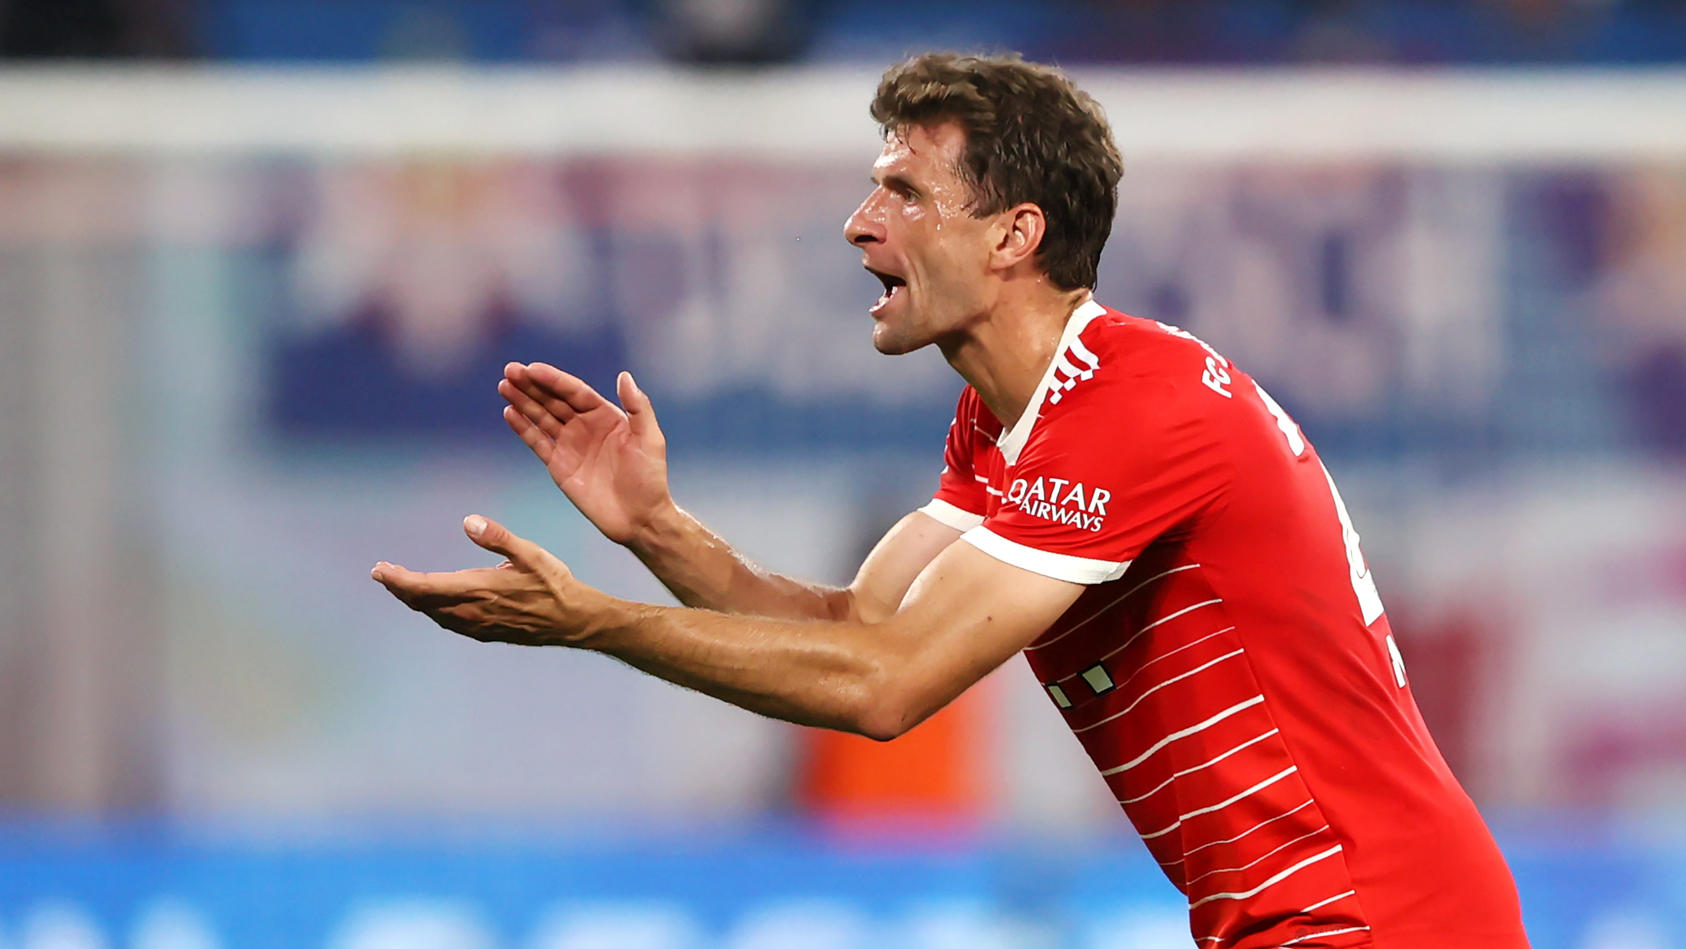 LEIPZIG, GERMANY - JULY 30: Thomas Muller of Bayern Munich reacts during the Supercup 2022 match between RB Leipzig and FC Bayern MÃ¼nchen at Red Bull Arena on July 30, 2022 in Leipzig, Germany. (Photo by Martin Rose/Getty Images)